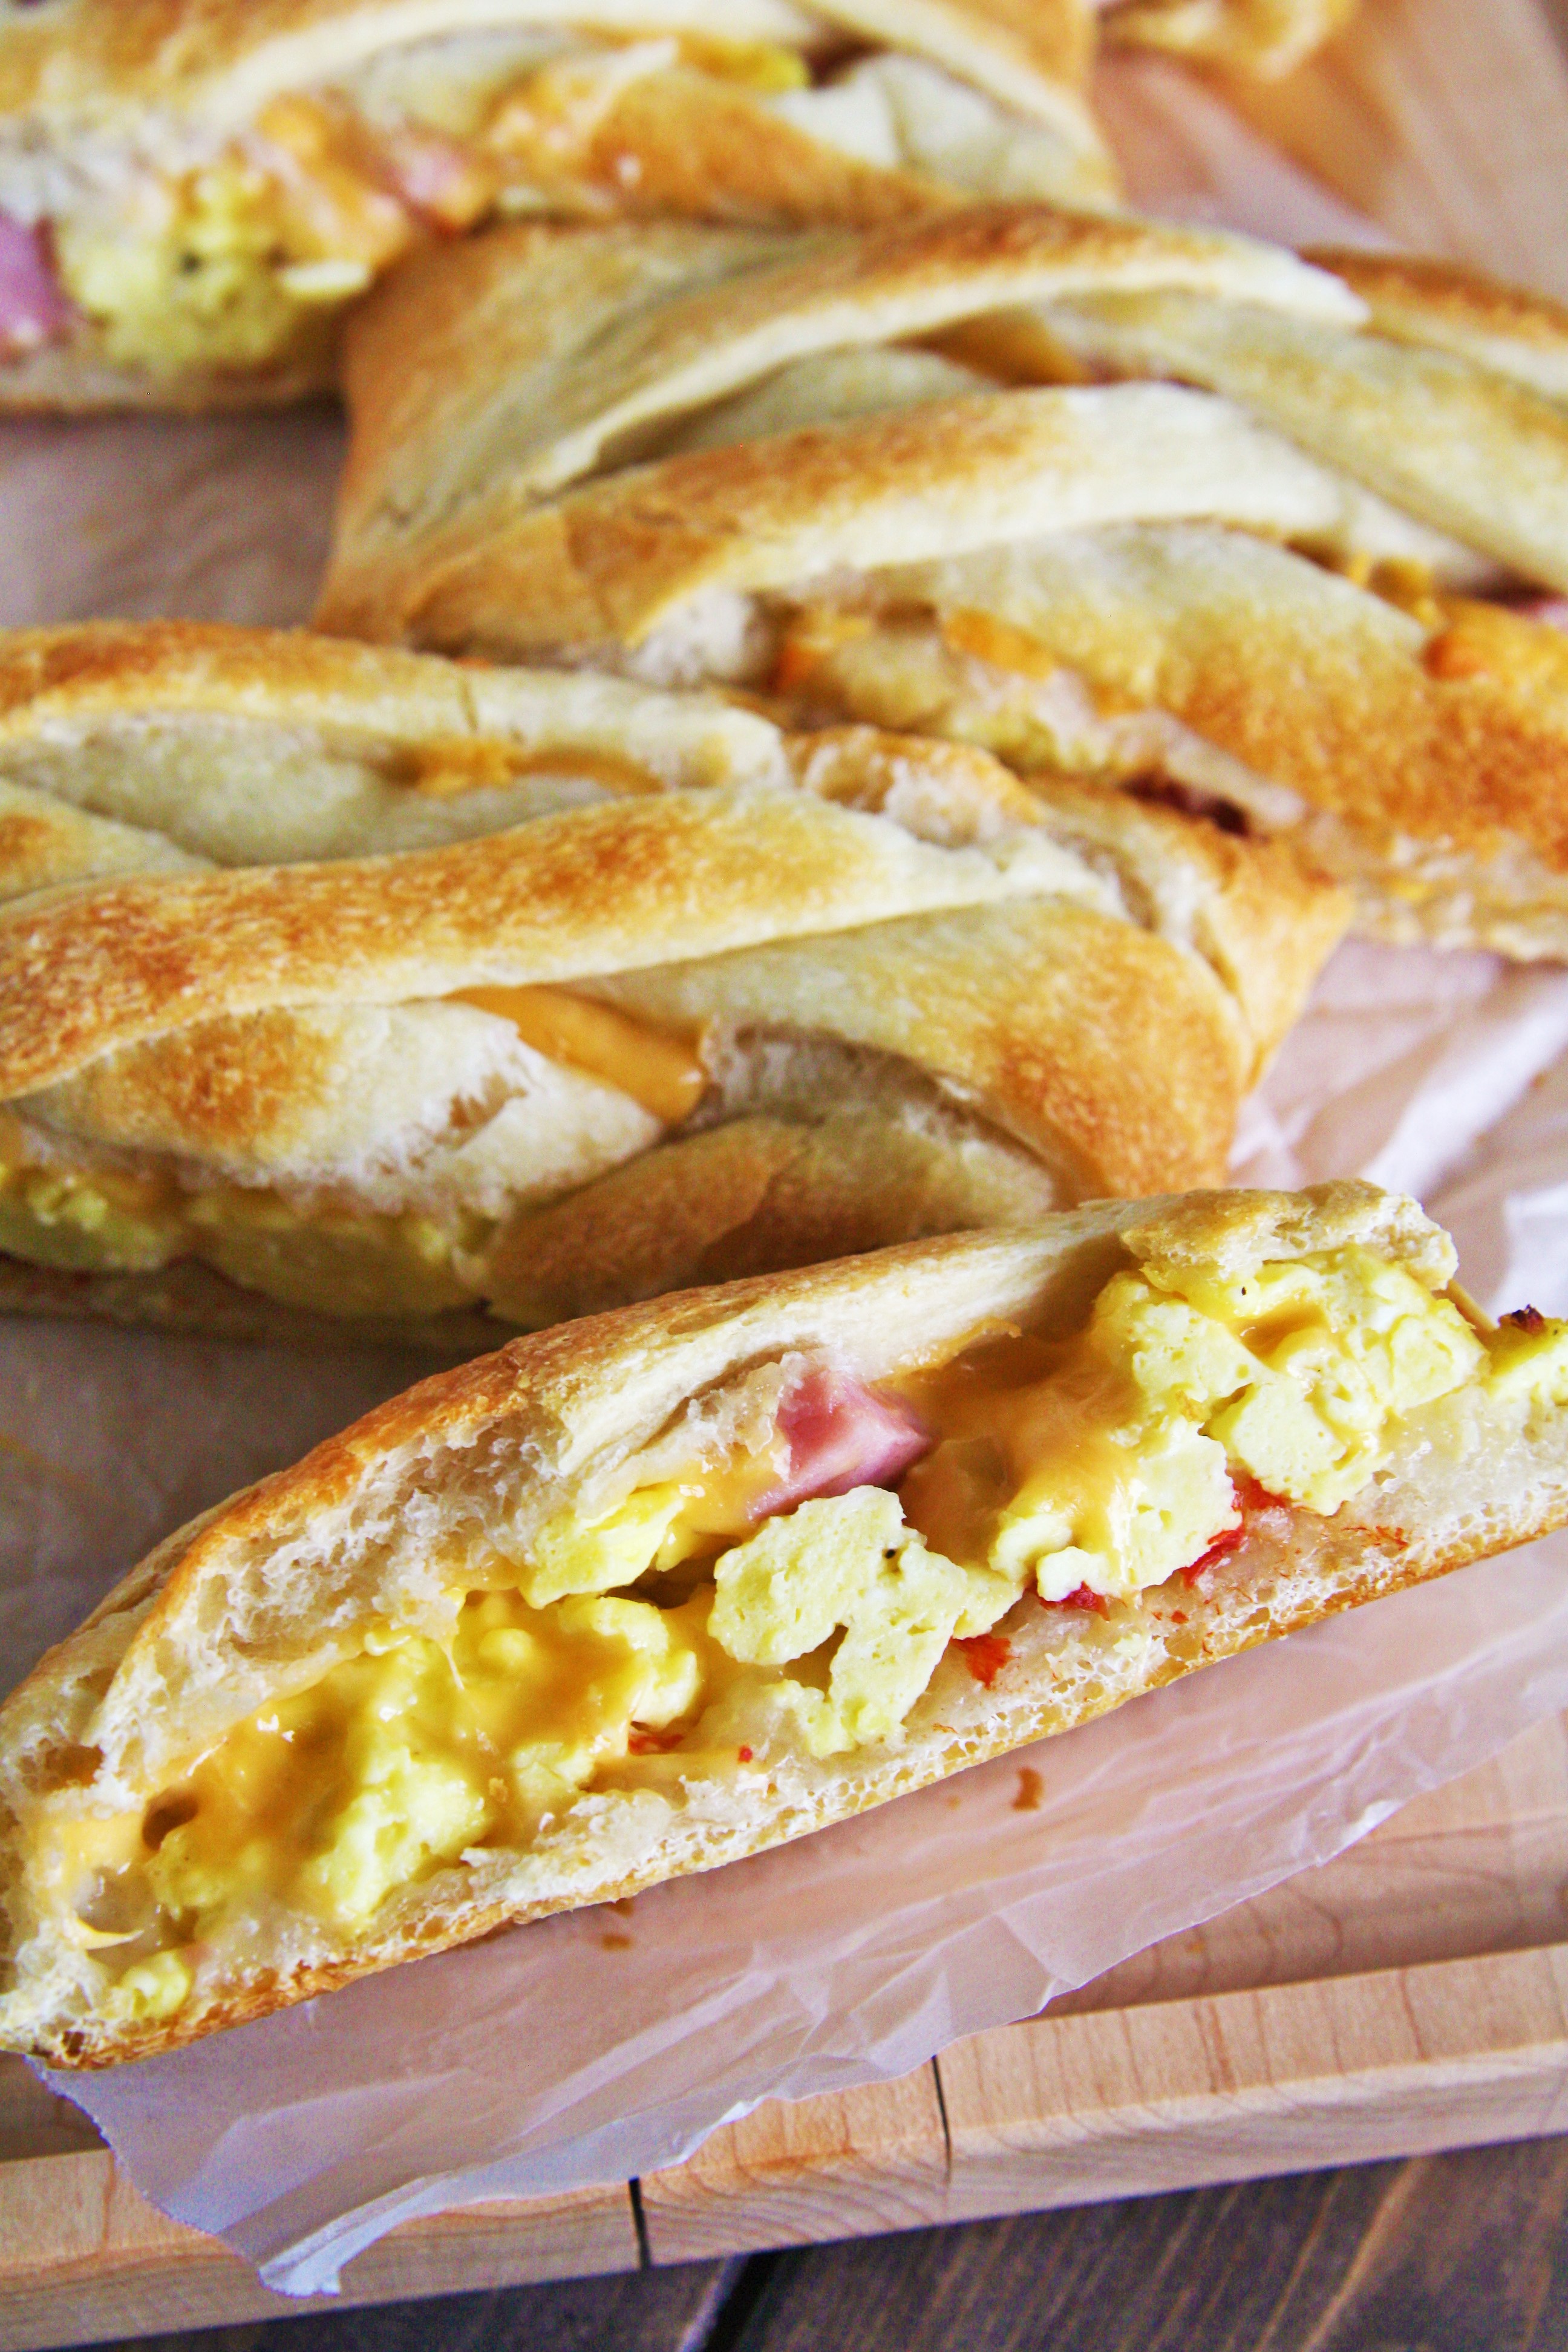 This Ham, Egg, and Cheddar Breakfast Braid is loaded with scrambled eggs, diced ham, peppers, and lots of cheese - perfect for serving a crowd!